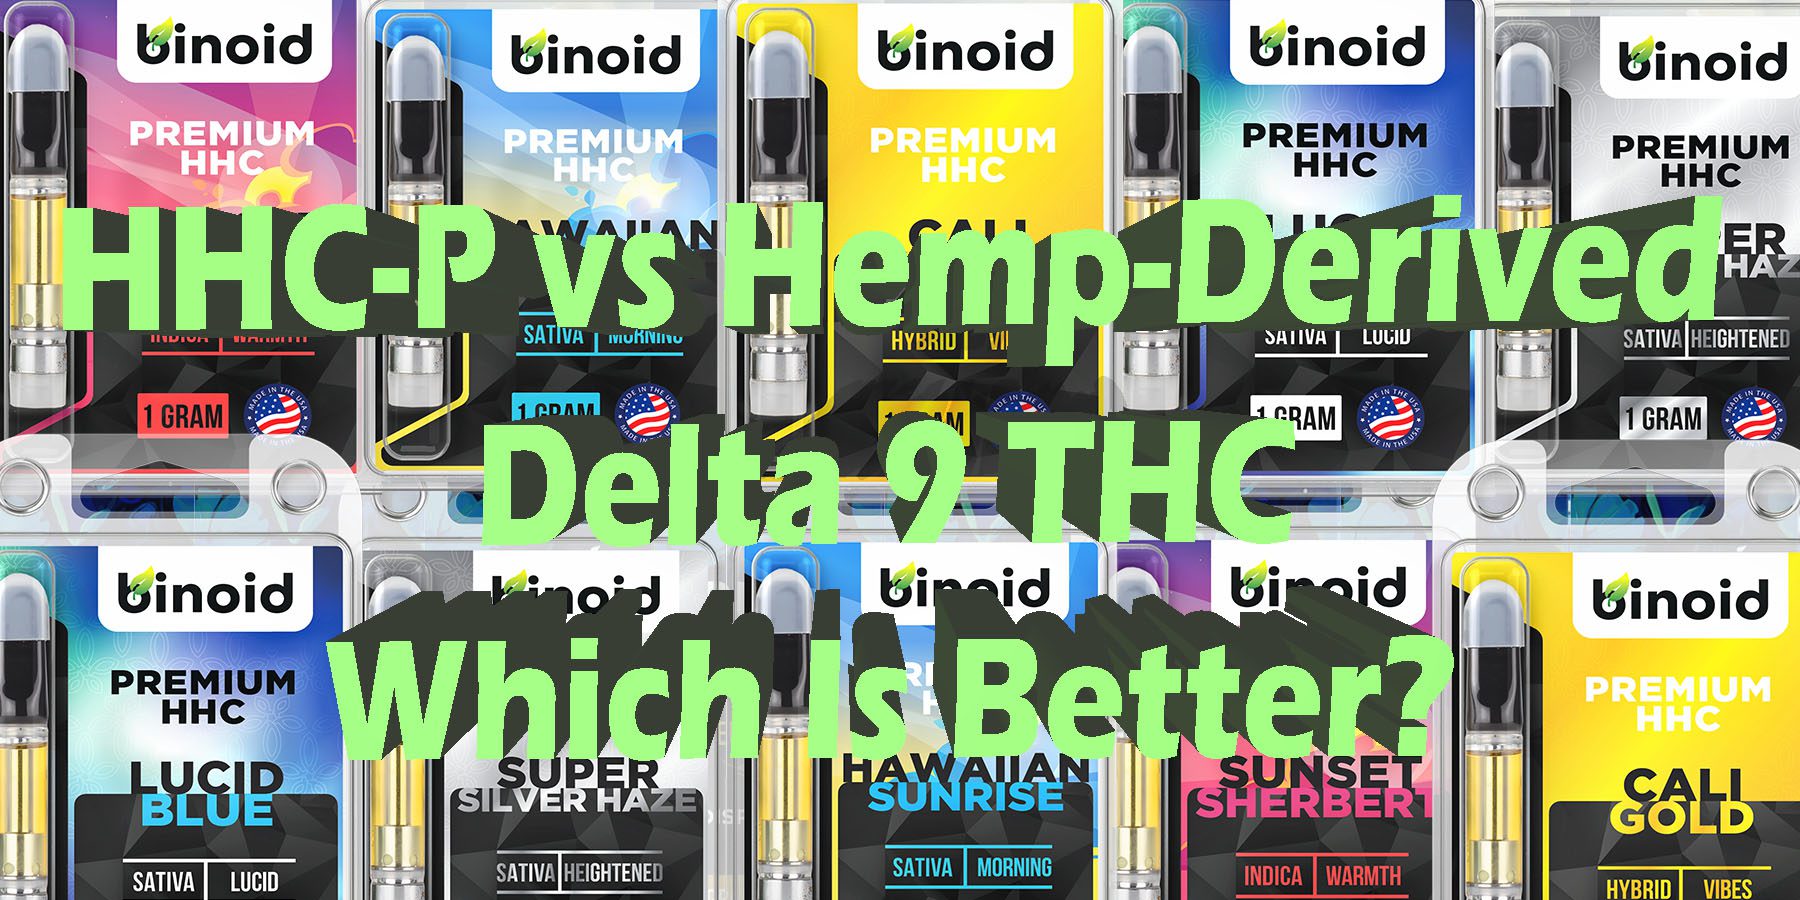 HHC P vs Hemp Derived Delta 9 THC Which Is Better HowToGetNearMe BestPlace LowestPrice Coupon Discount For Smoking Best Brand D9 D8 THCA Indoor Binoid